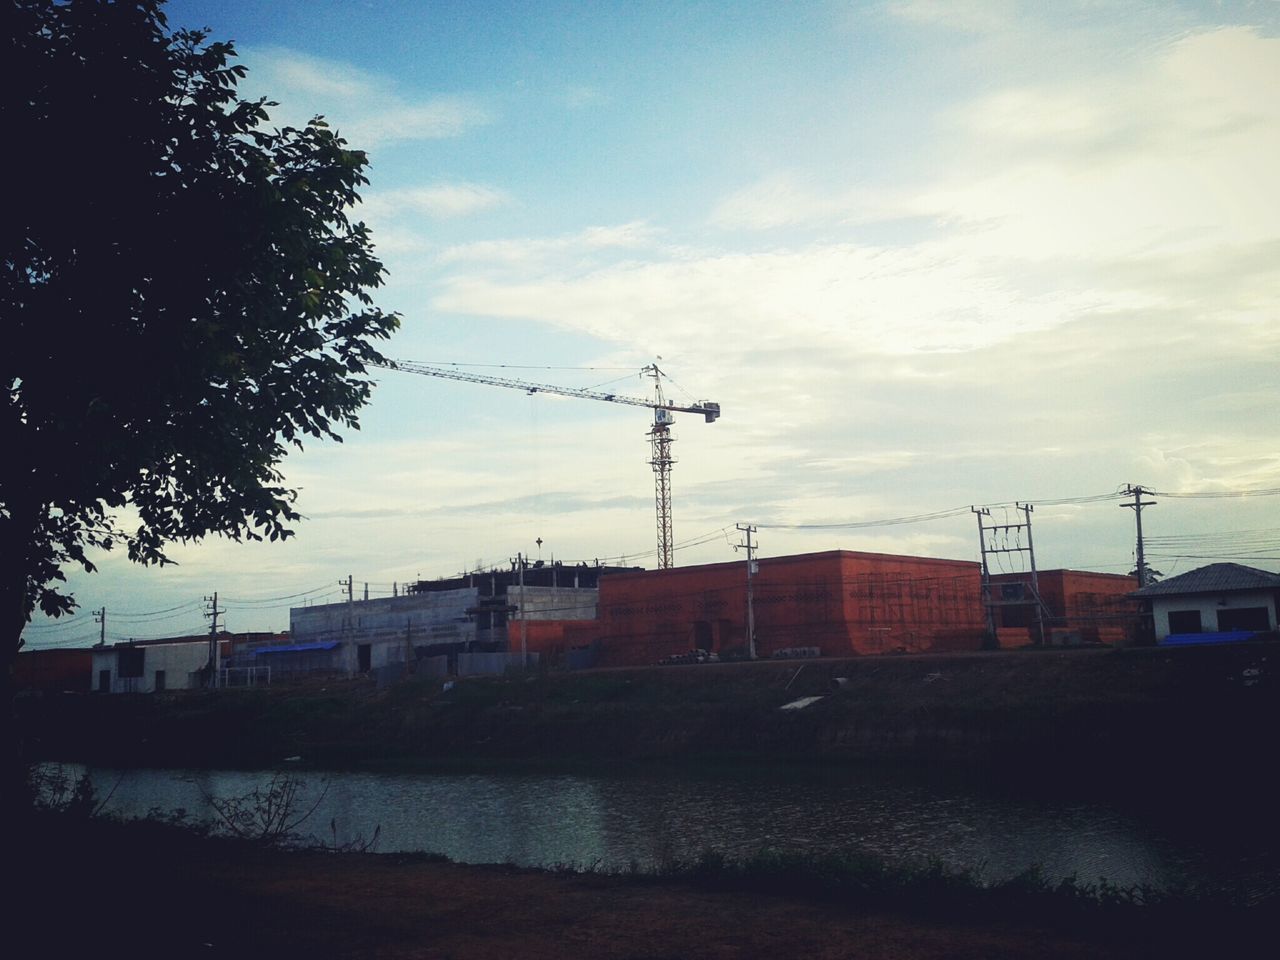 SILHOUETTE OF BUILDINGS AND CRANE